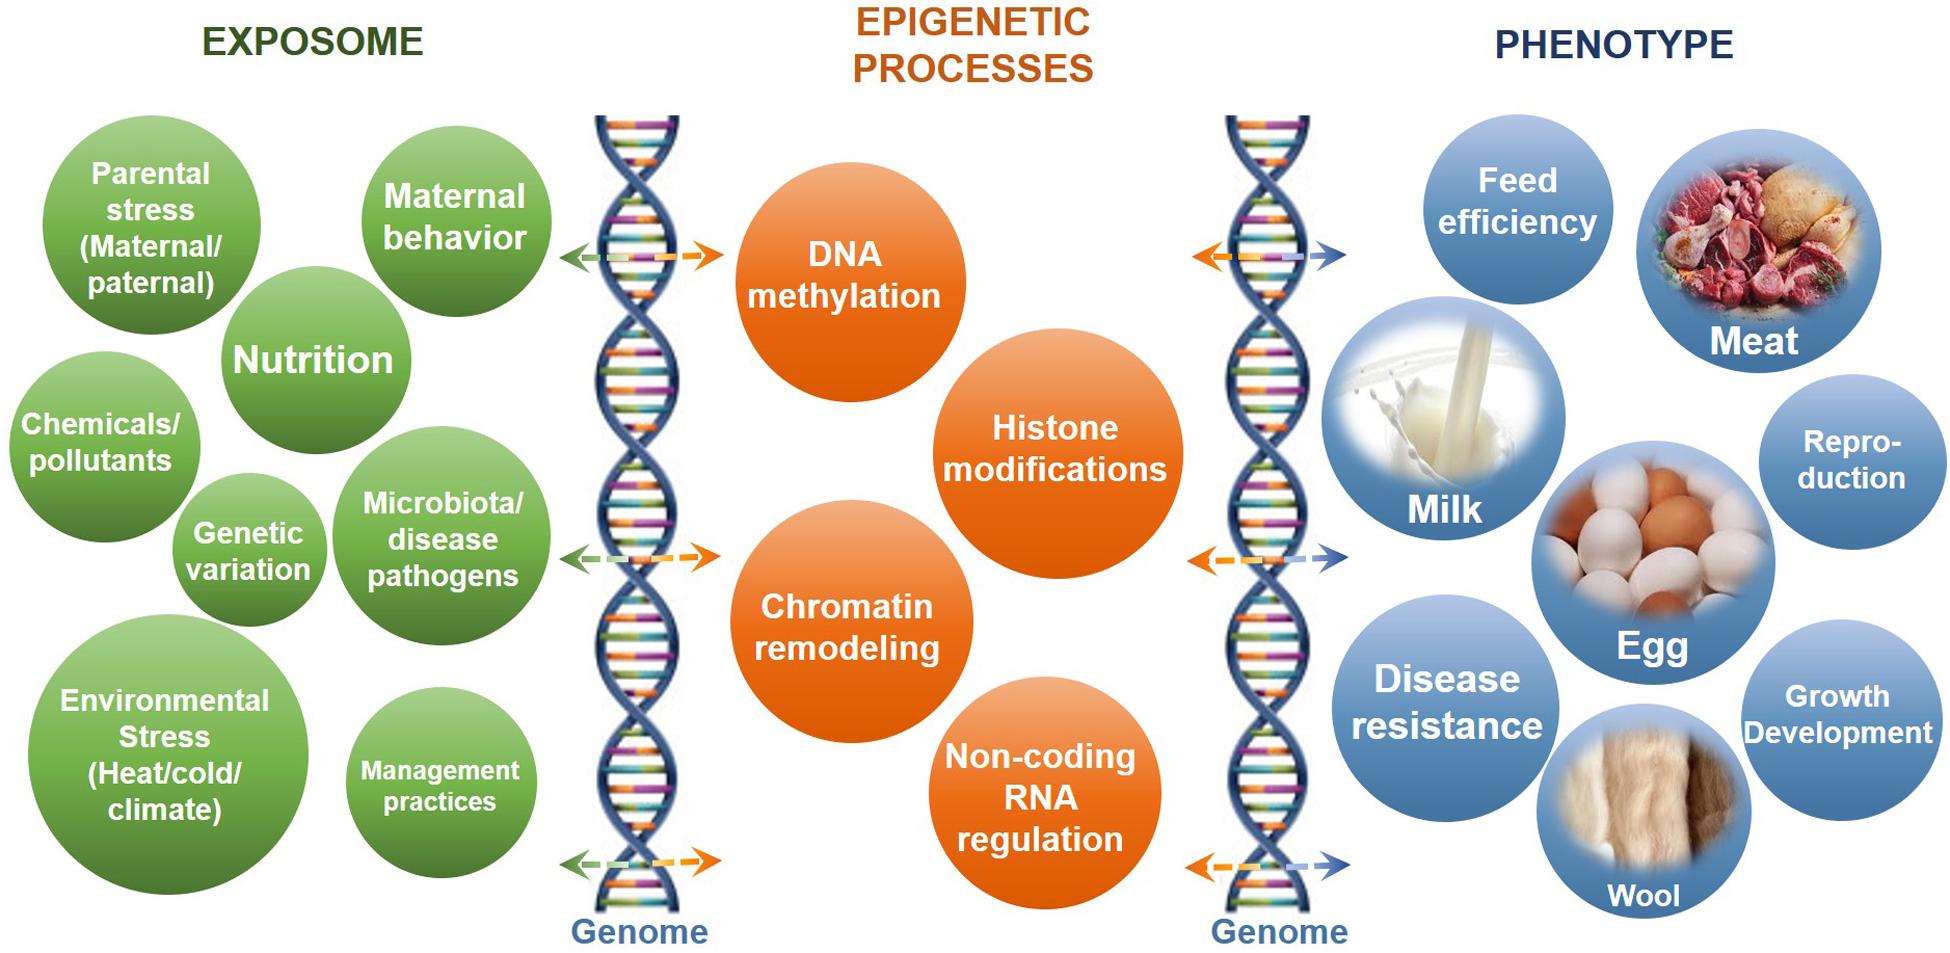 Frontiers | Impacts of Epigenetic Processes on the Health and